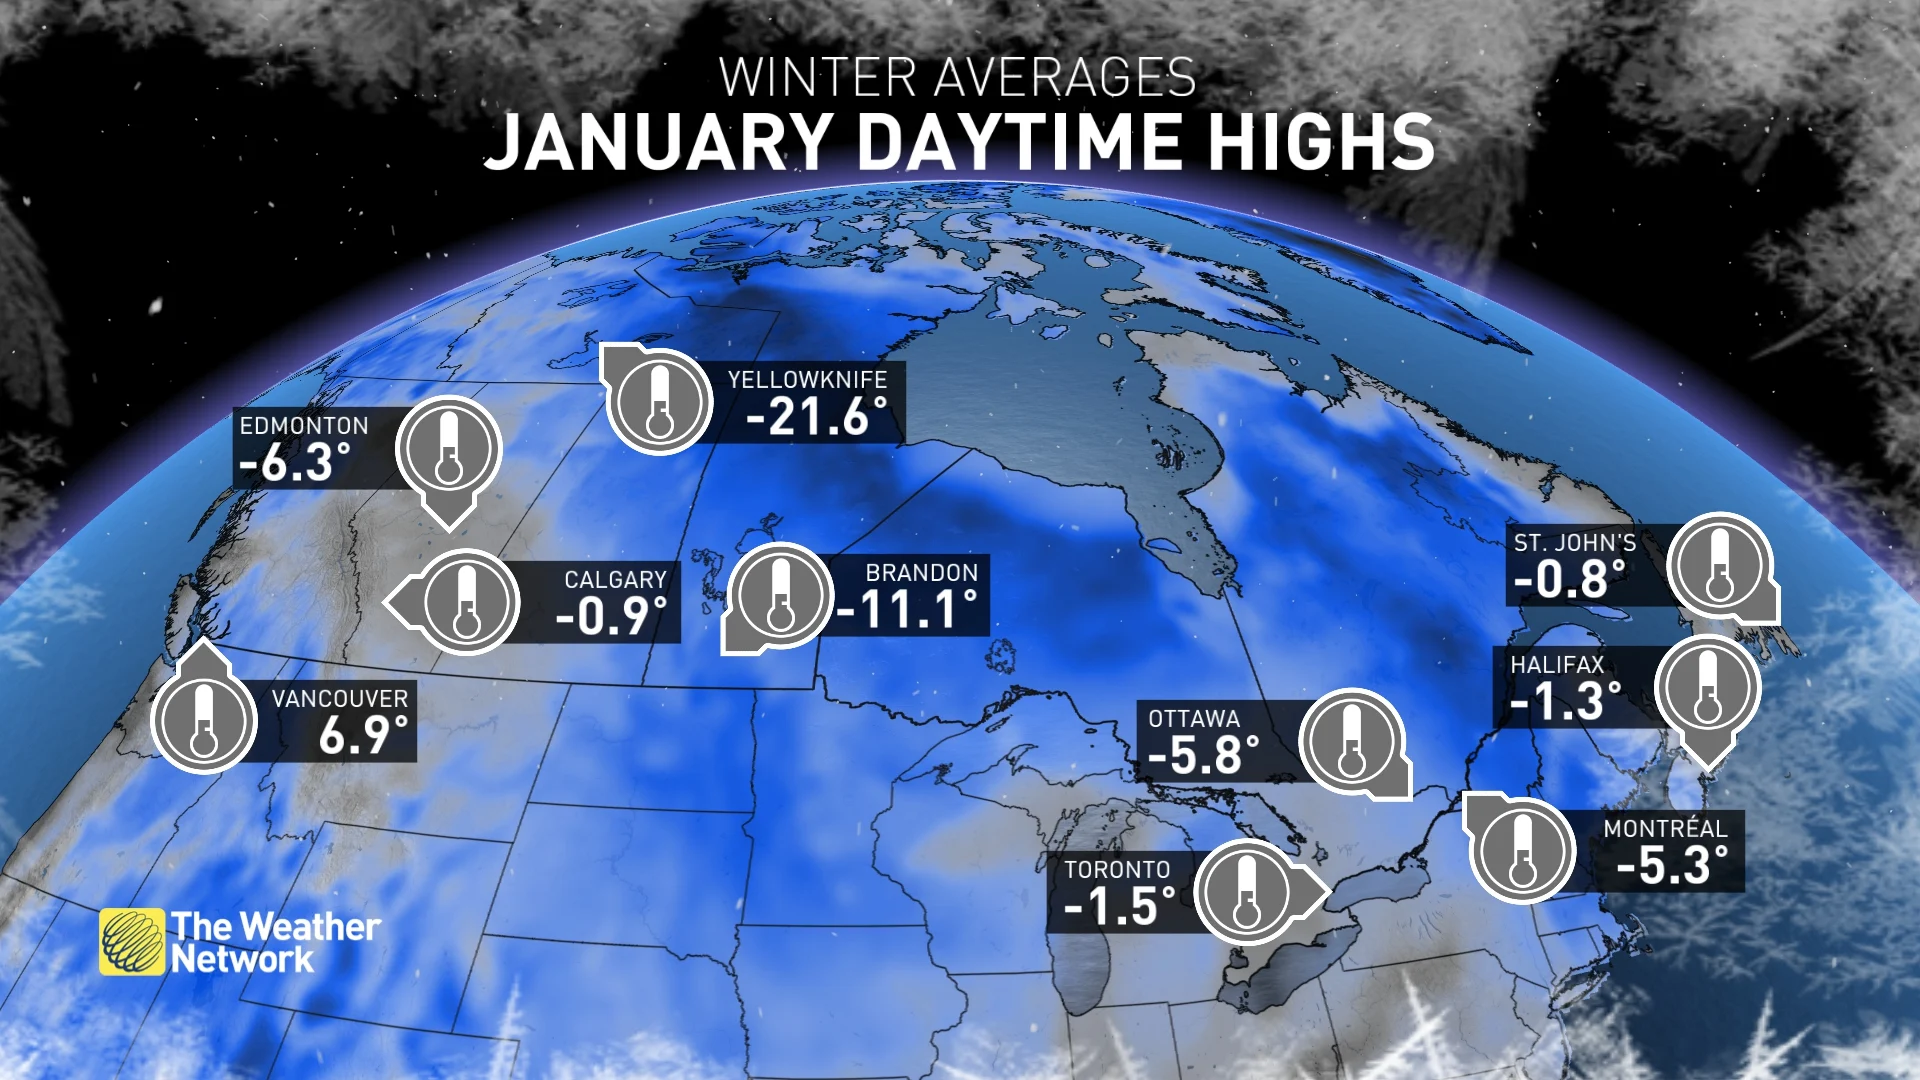 Canada's January Daytime Highs - The Weather Network